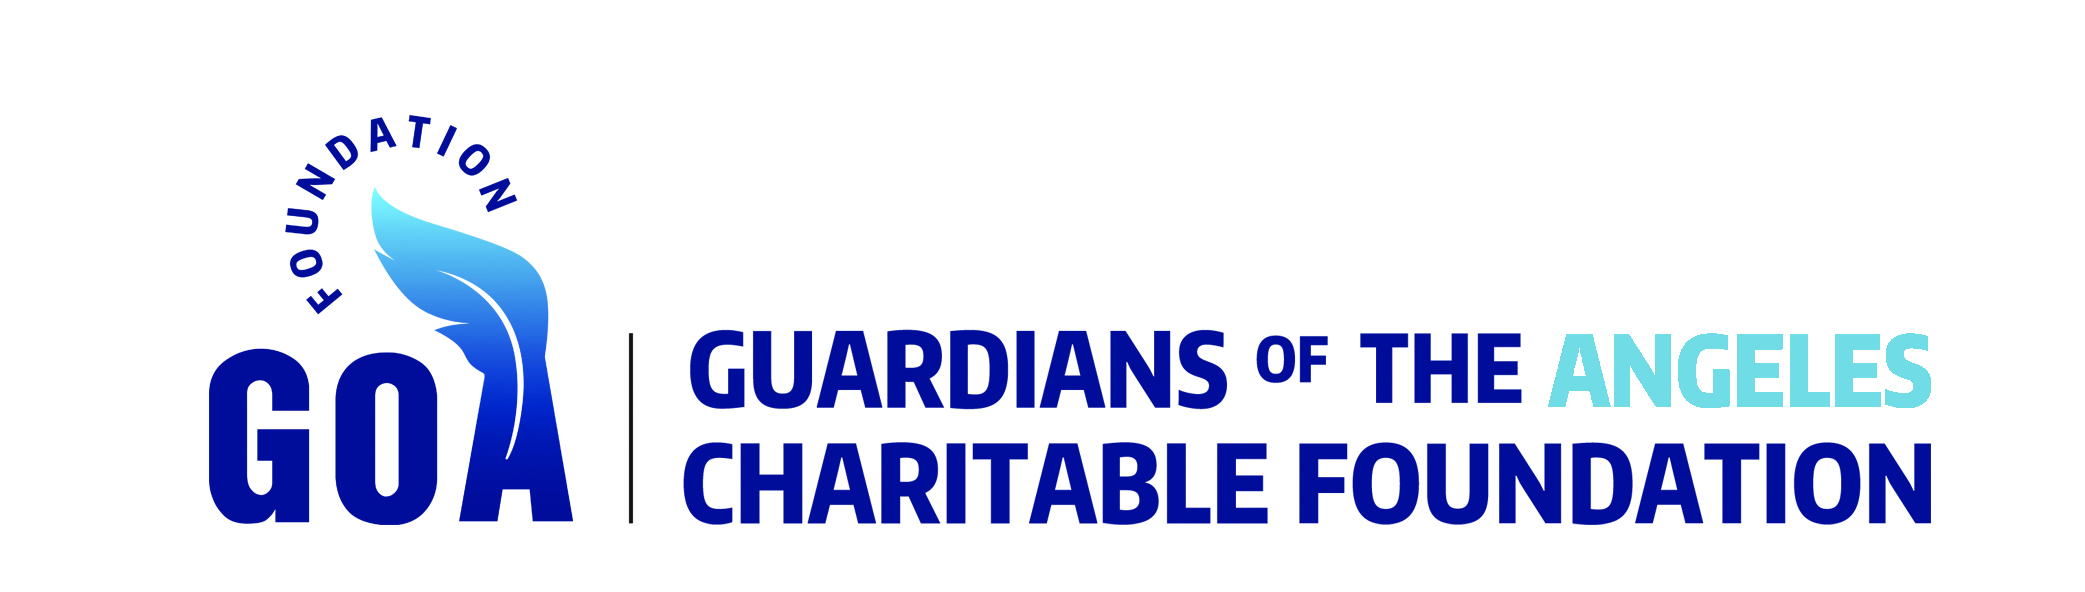 Guardians of the Angeles Charitable Foundation